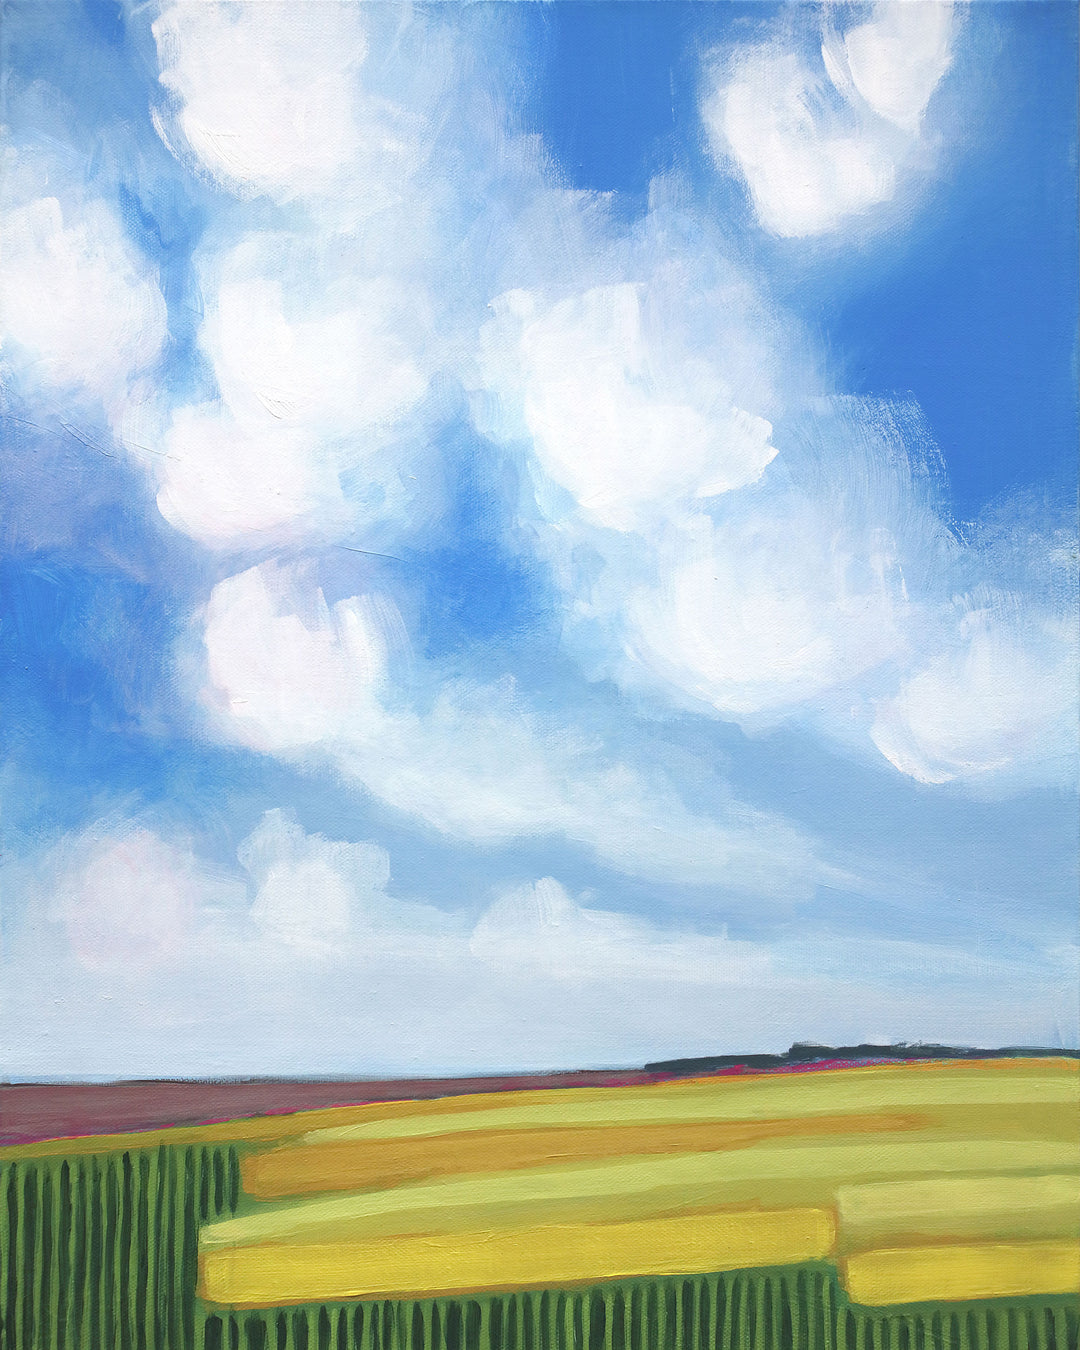 Abstract landscape painting with green and yellow crops, a blue sky and puffy, white clouds.